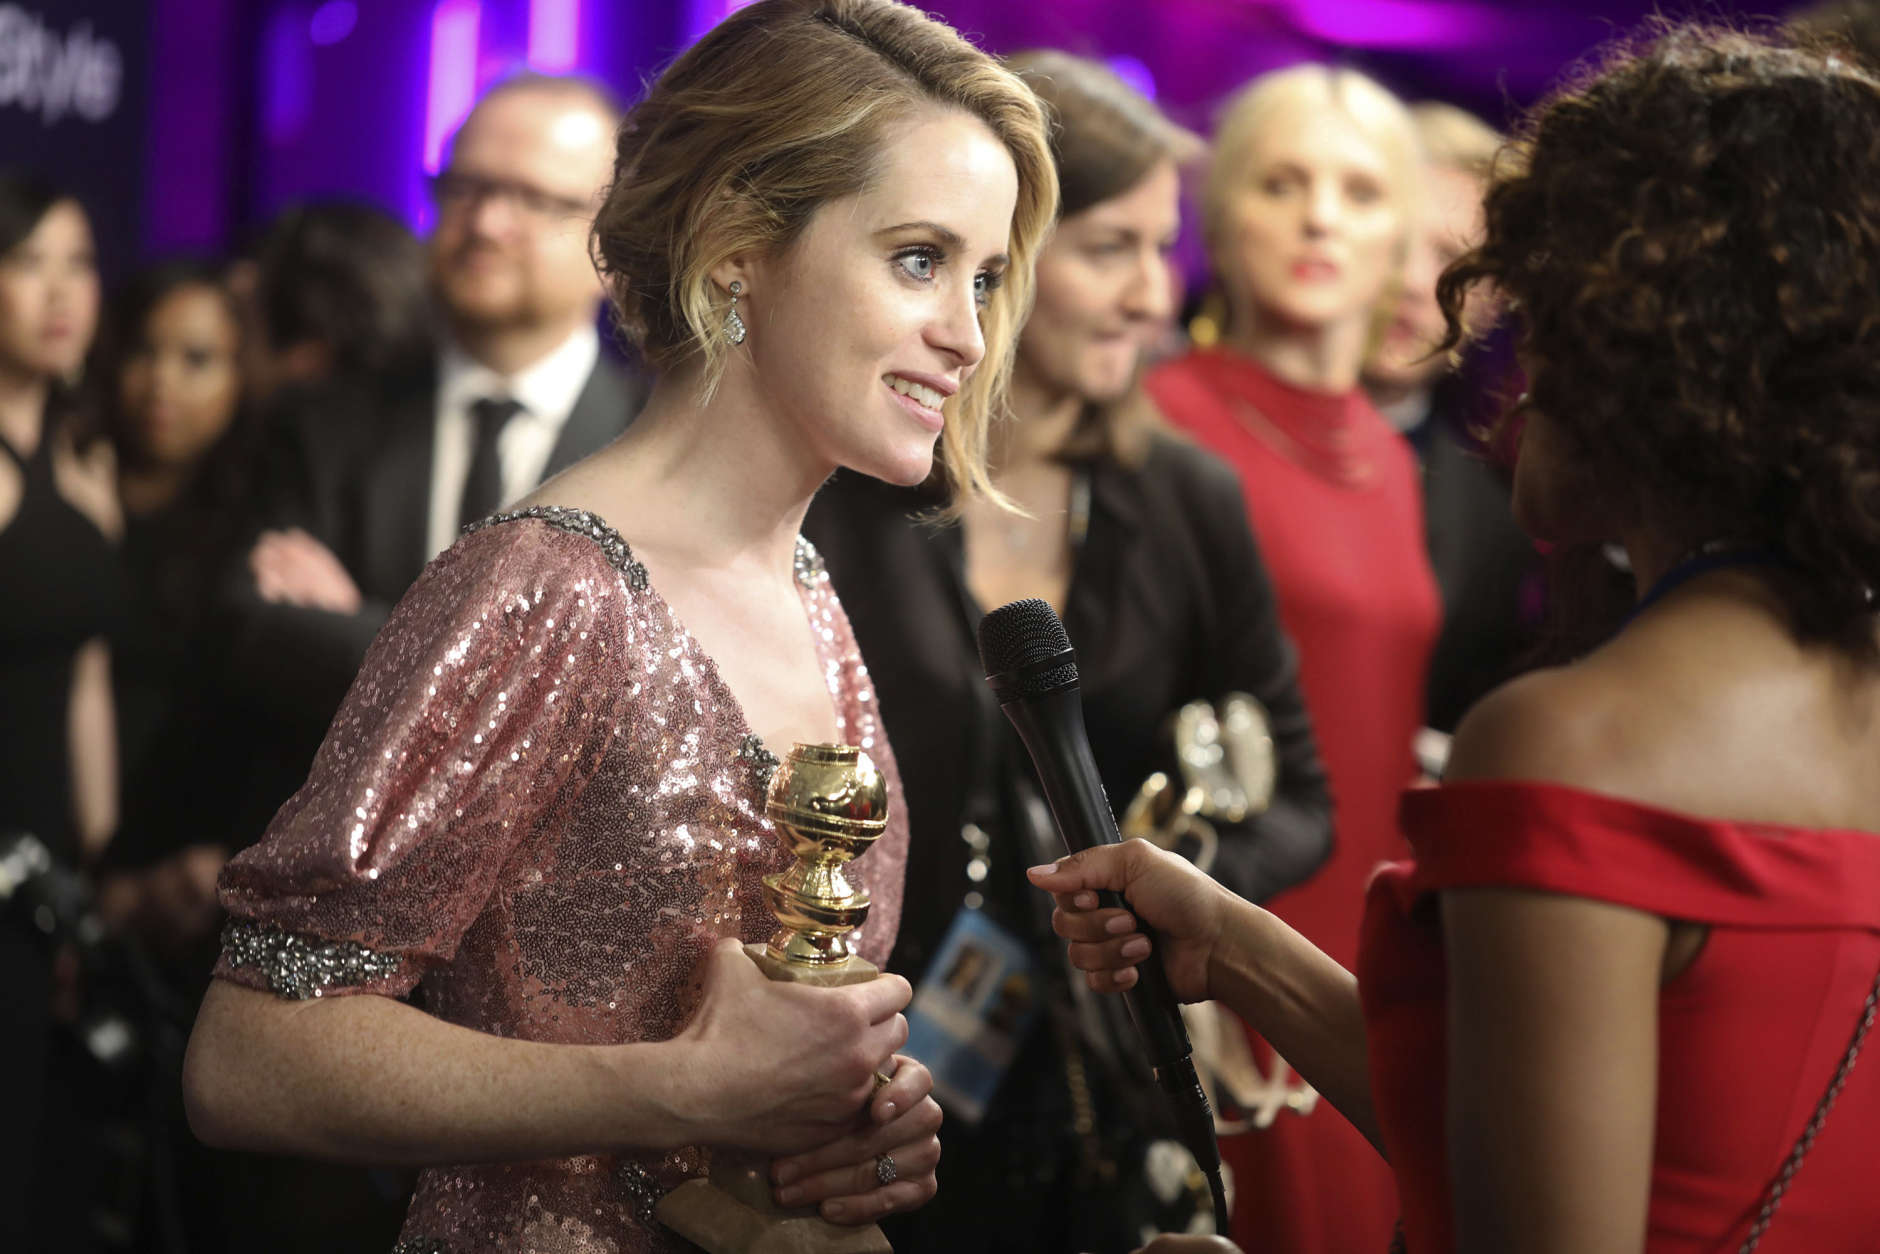 Claire Foy is interviewed as she arrives at the InStyle and Warner Bros. Golden Globes afterparty at the Beverly Hilton Hotel on Sunday, Jan. 8, 2017, in Beverly Hills, Calif. (Photo by Matt Sayles/Invision/AP)